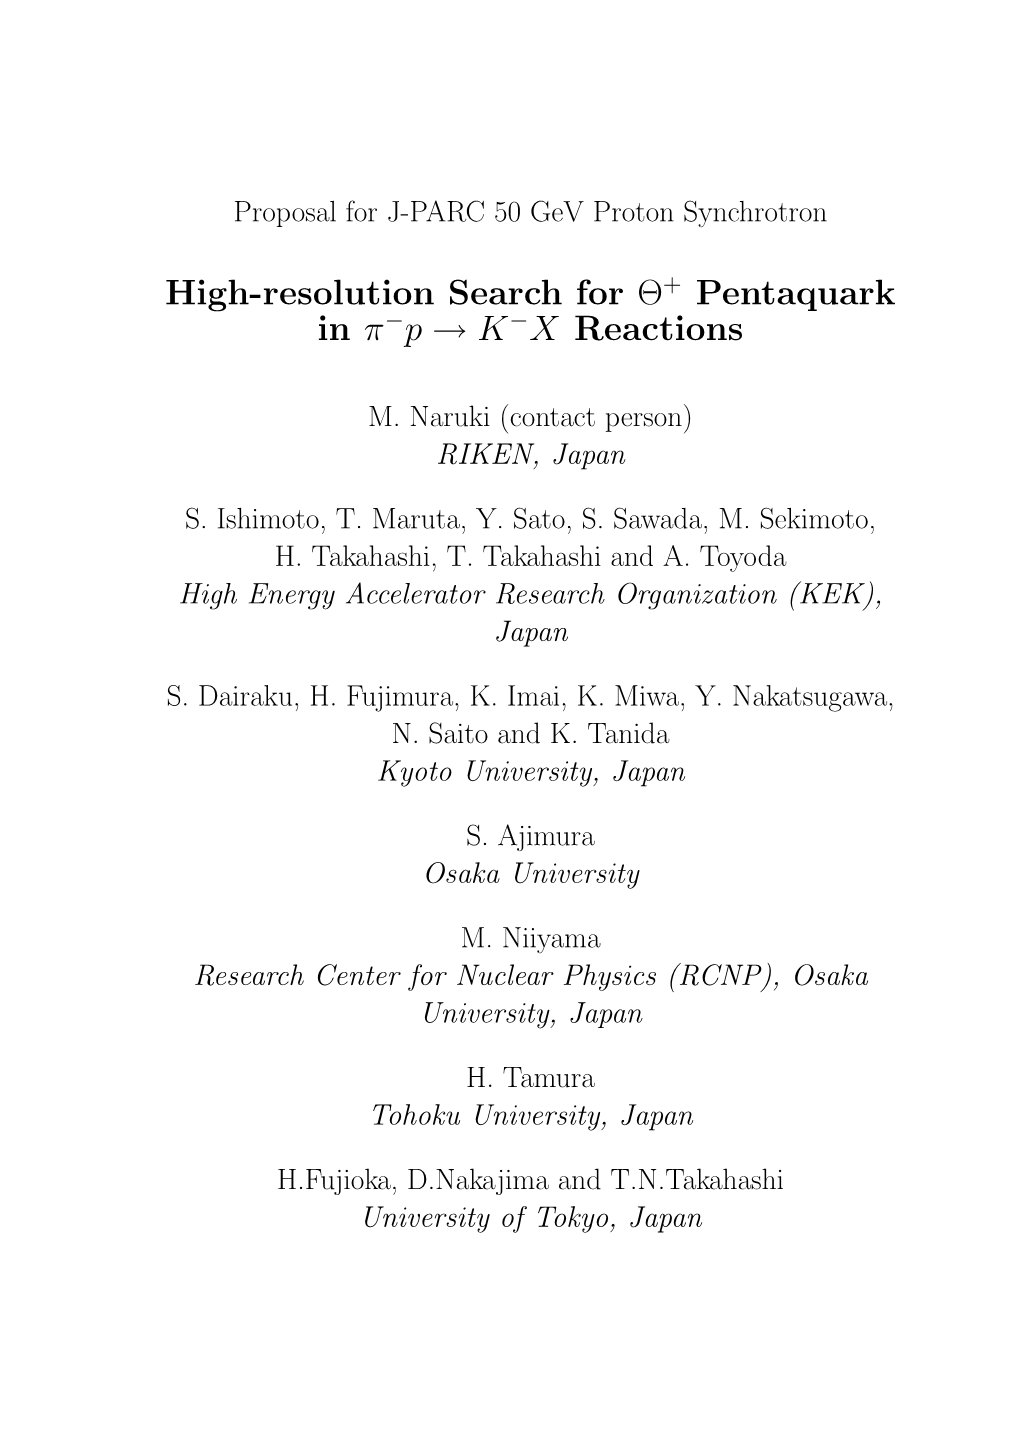 High-Resolution Search for Θ Pentaquark in Π